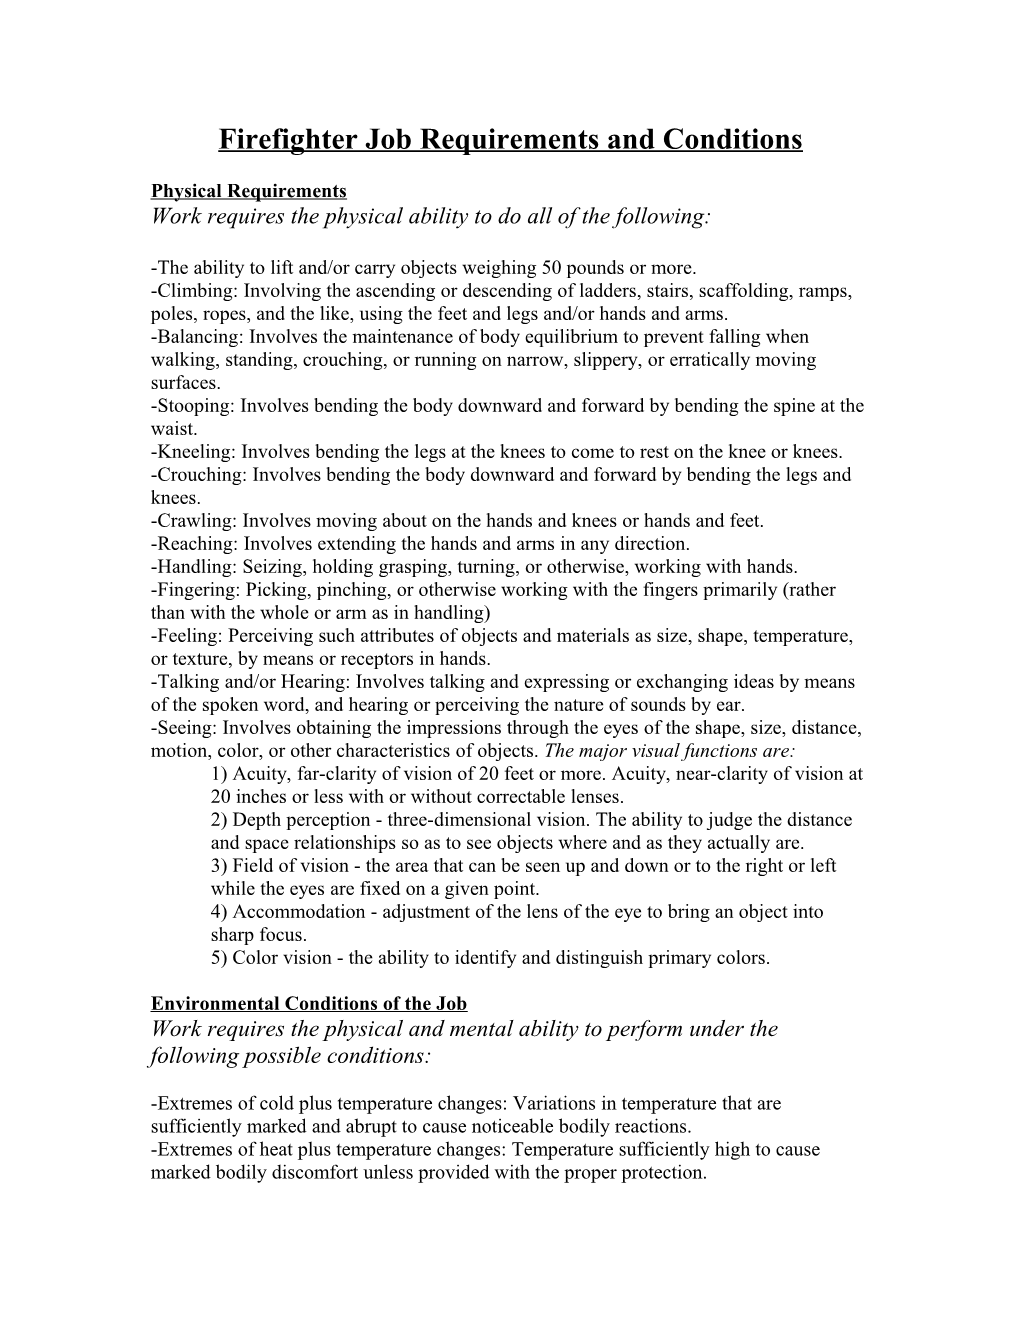 Firefighter Job Requirements and Conditions